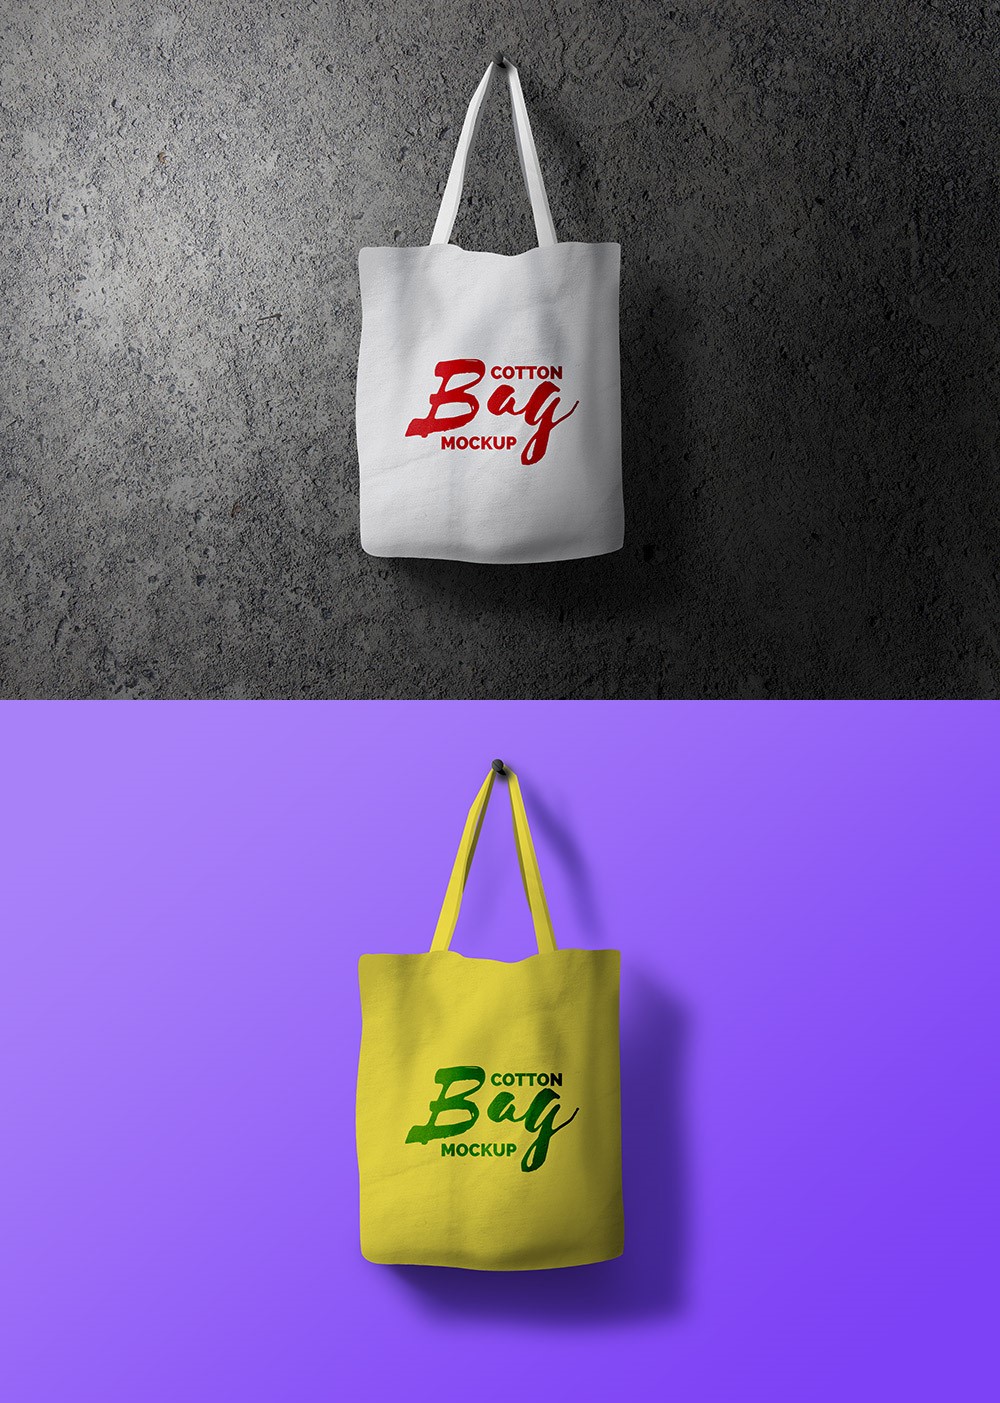 80+ Free Shopping Bag Mockup Templates | Graphic Design Resources